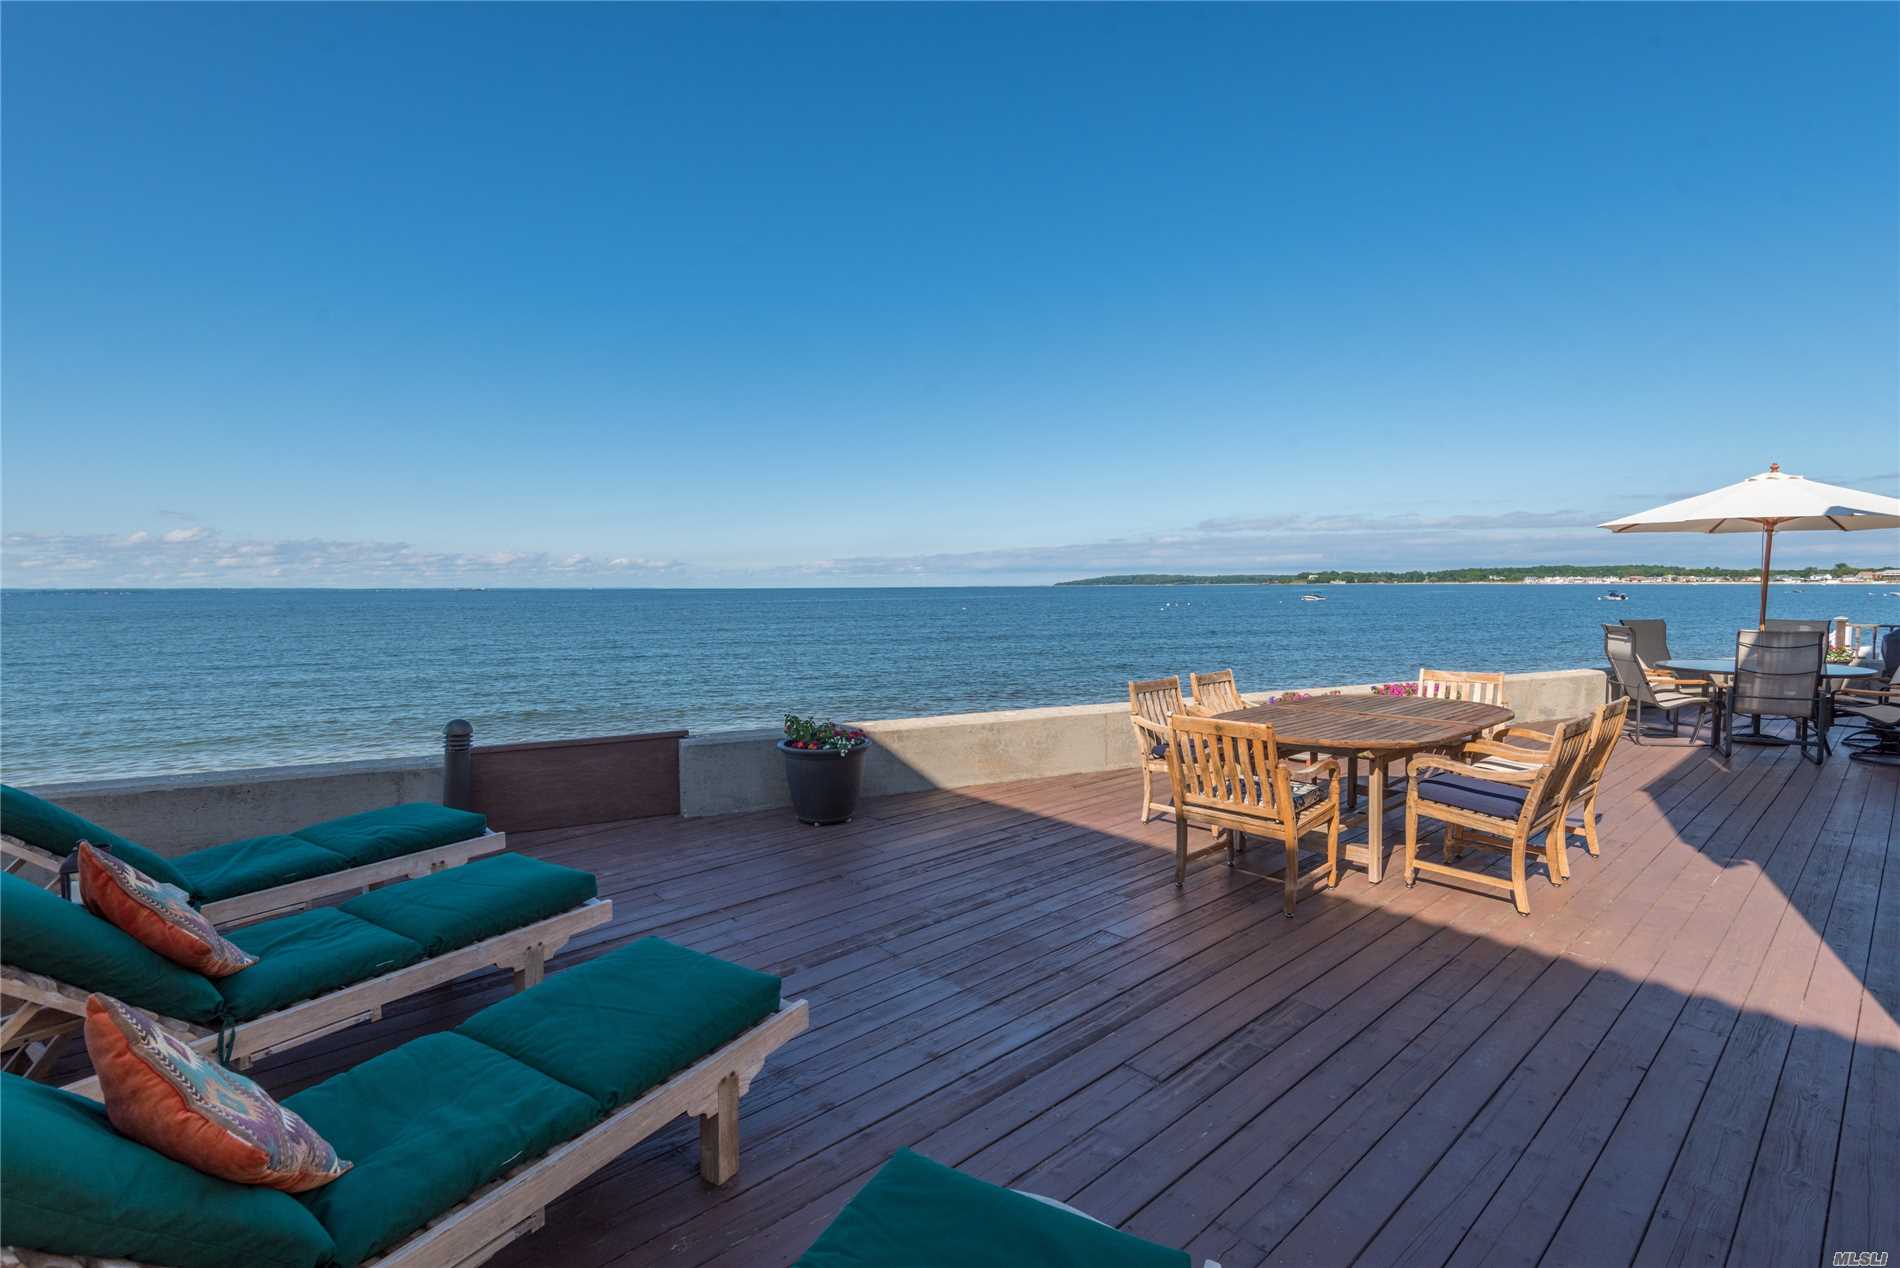 Breathtaking Waterfront Views Across The L.I. Sound To Connecticut.This Custom Built Hampton Style Colonial Offers An Open Floor Plan For Maximum Exposure To Fabulous Panoramic Views.A Concrete Retaining Wall Protects This Home.Enjoy This Mint Condition Home W/Deeded Beach & Mooring